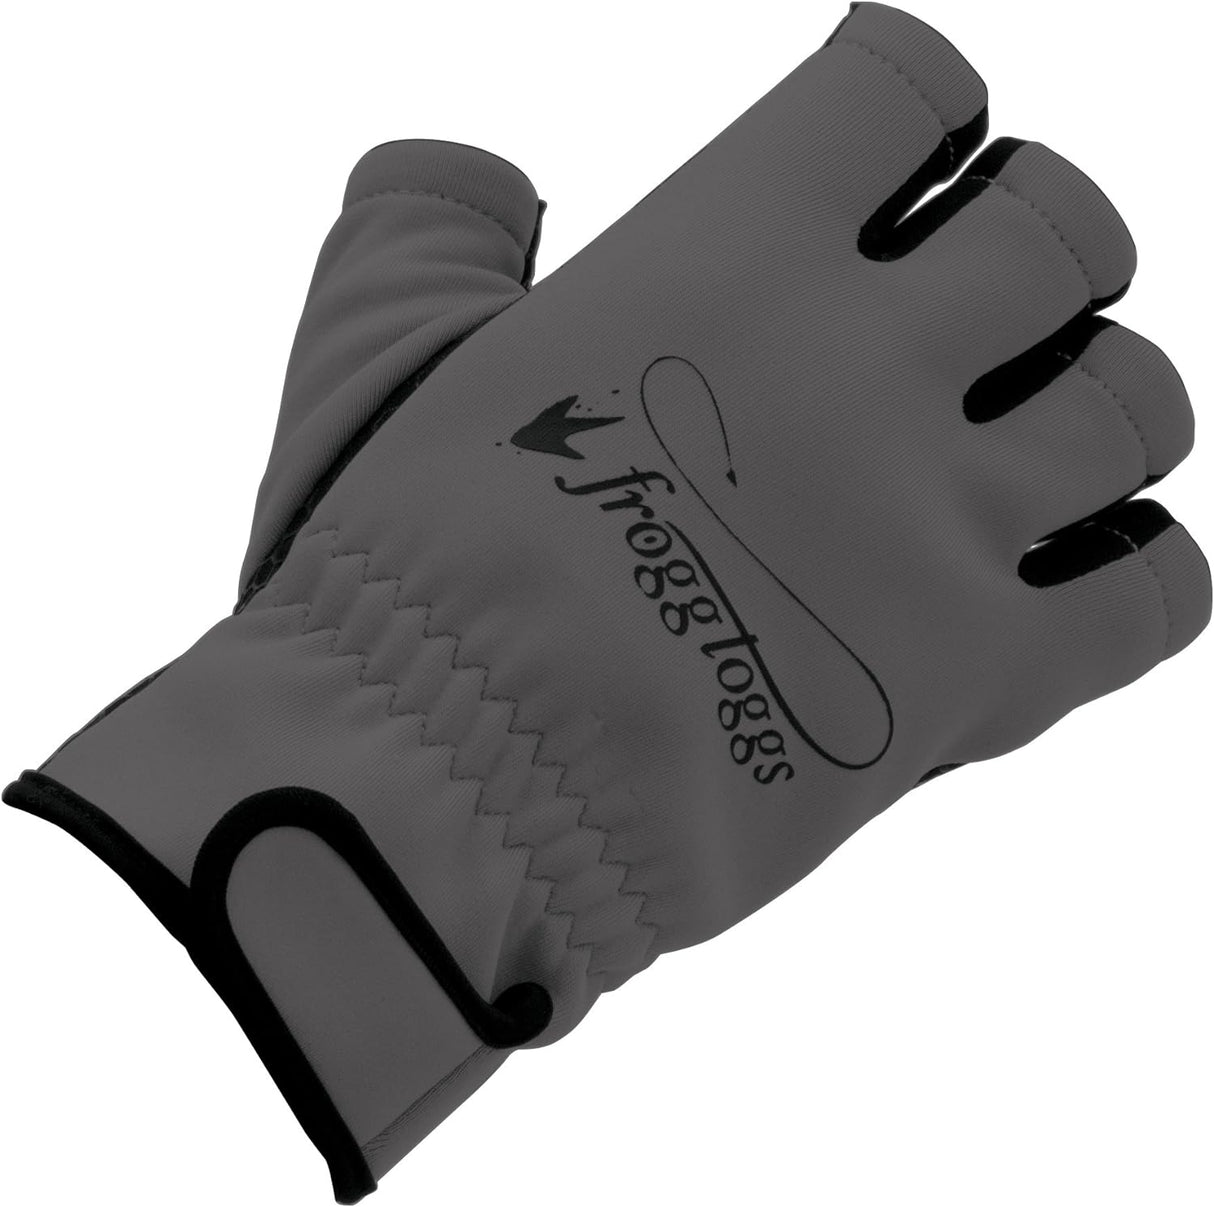 FROGG TOGGS FINGERLESS FLEECE GLOVES – GRAY & BLACK – DIFFERENT SIZES AVAILABLE